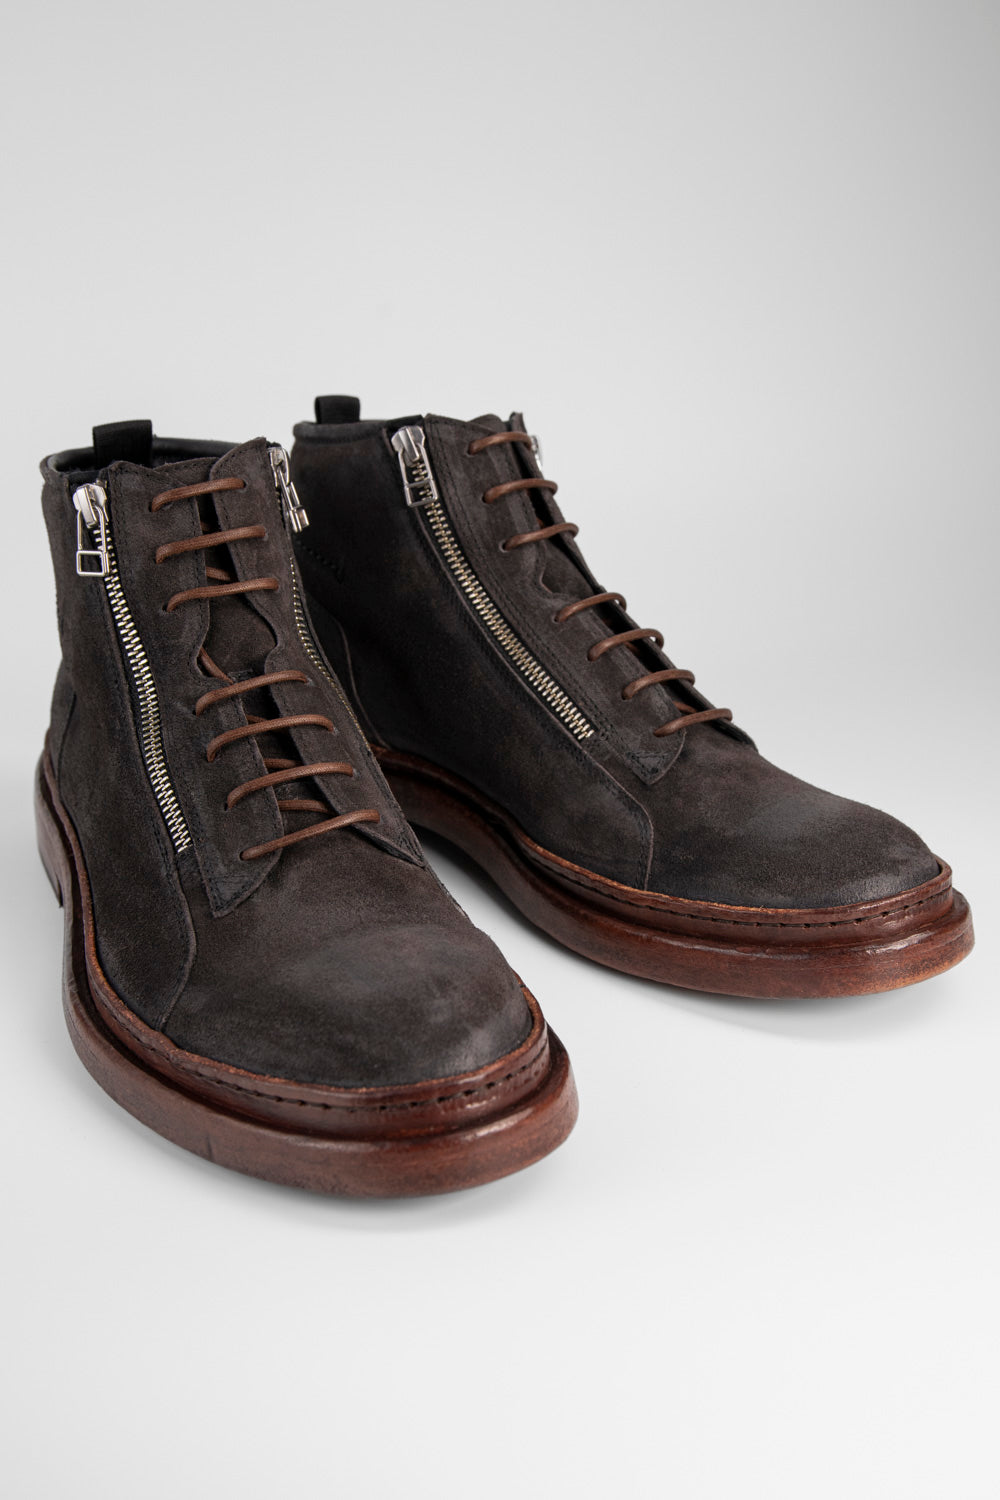 YORK lava-grey suede welted chukka boots.